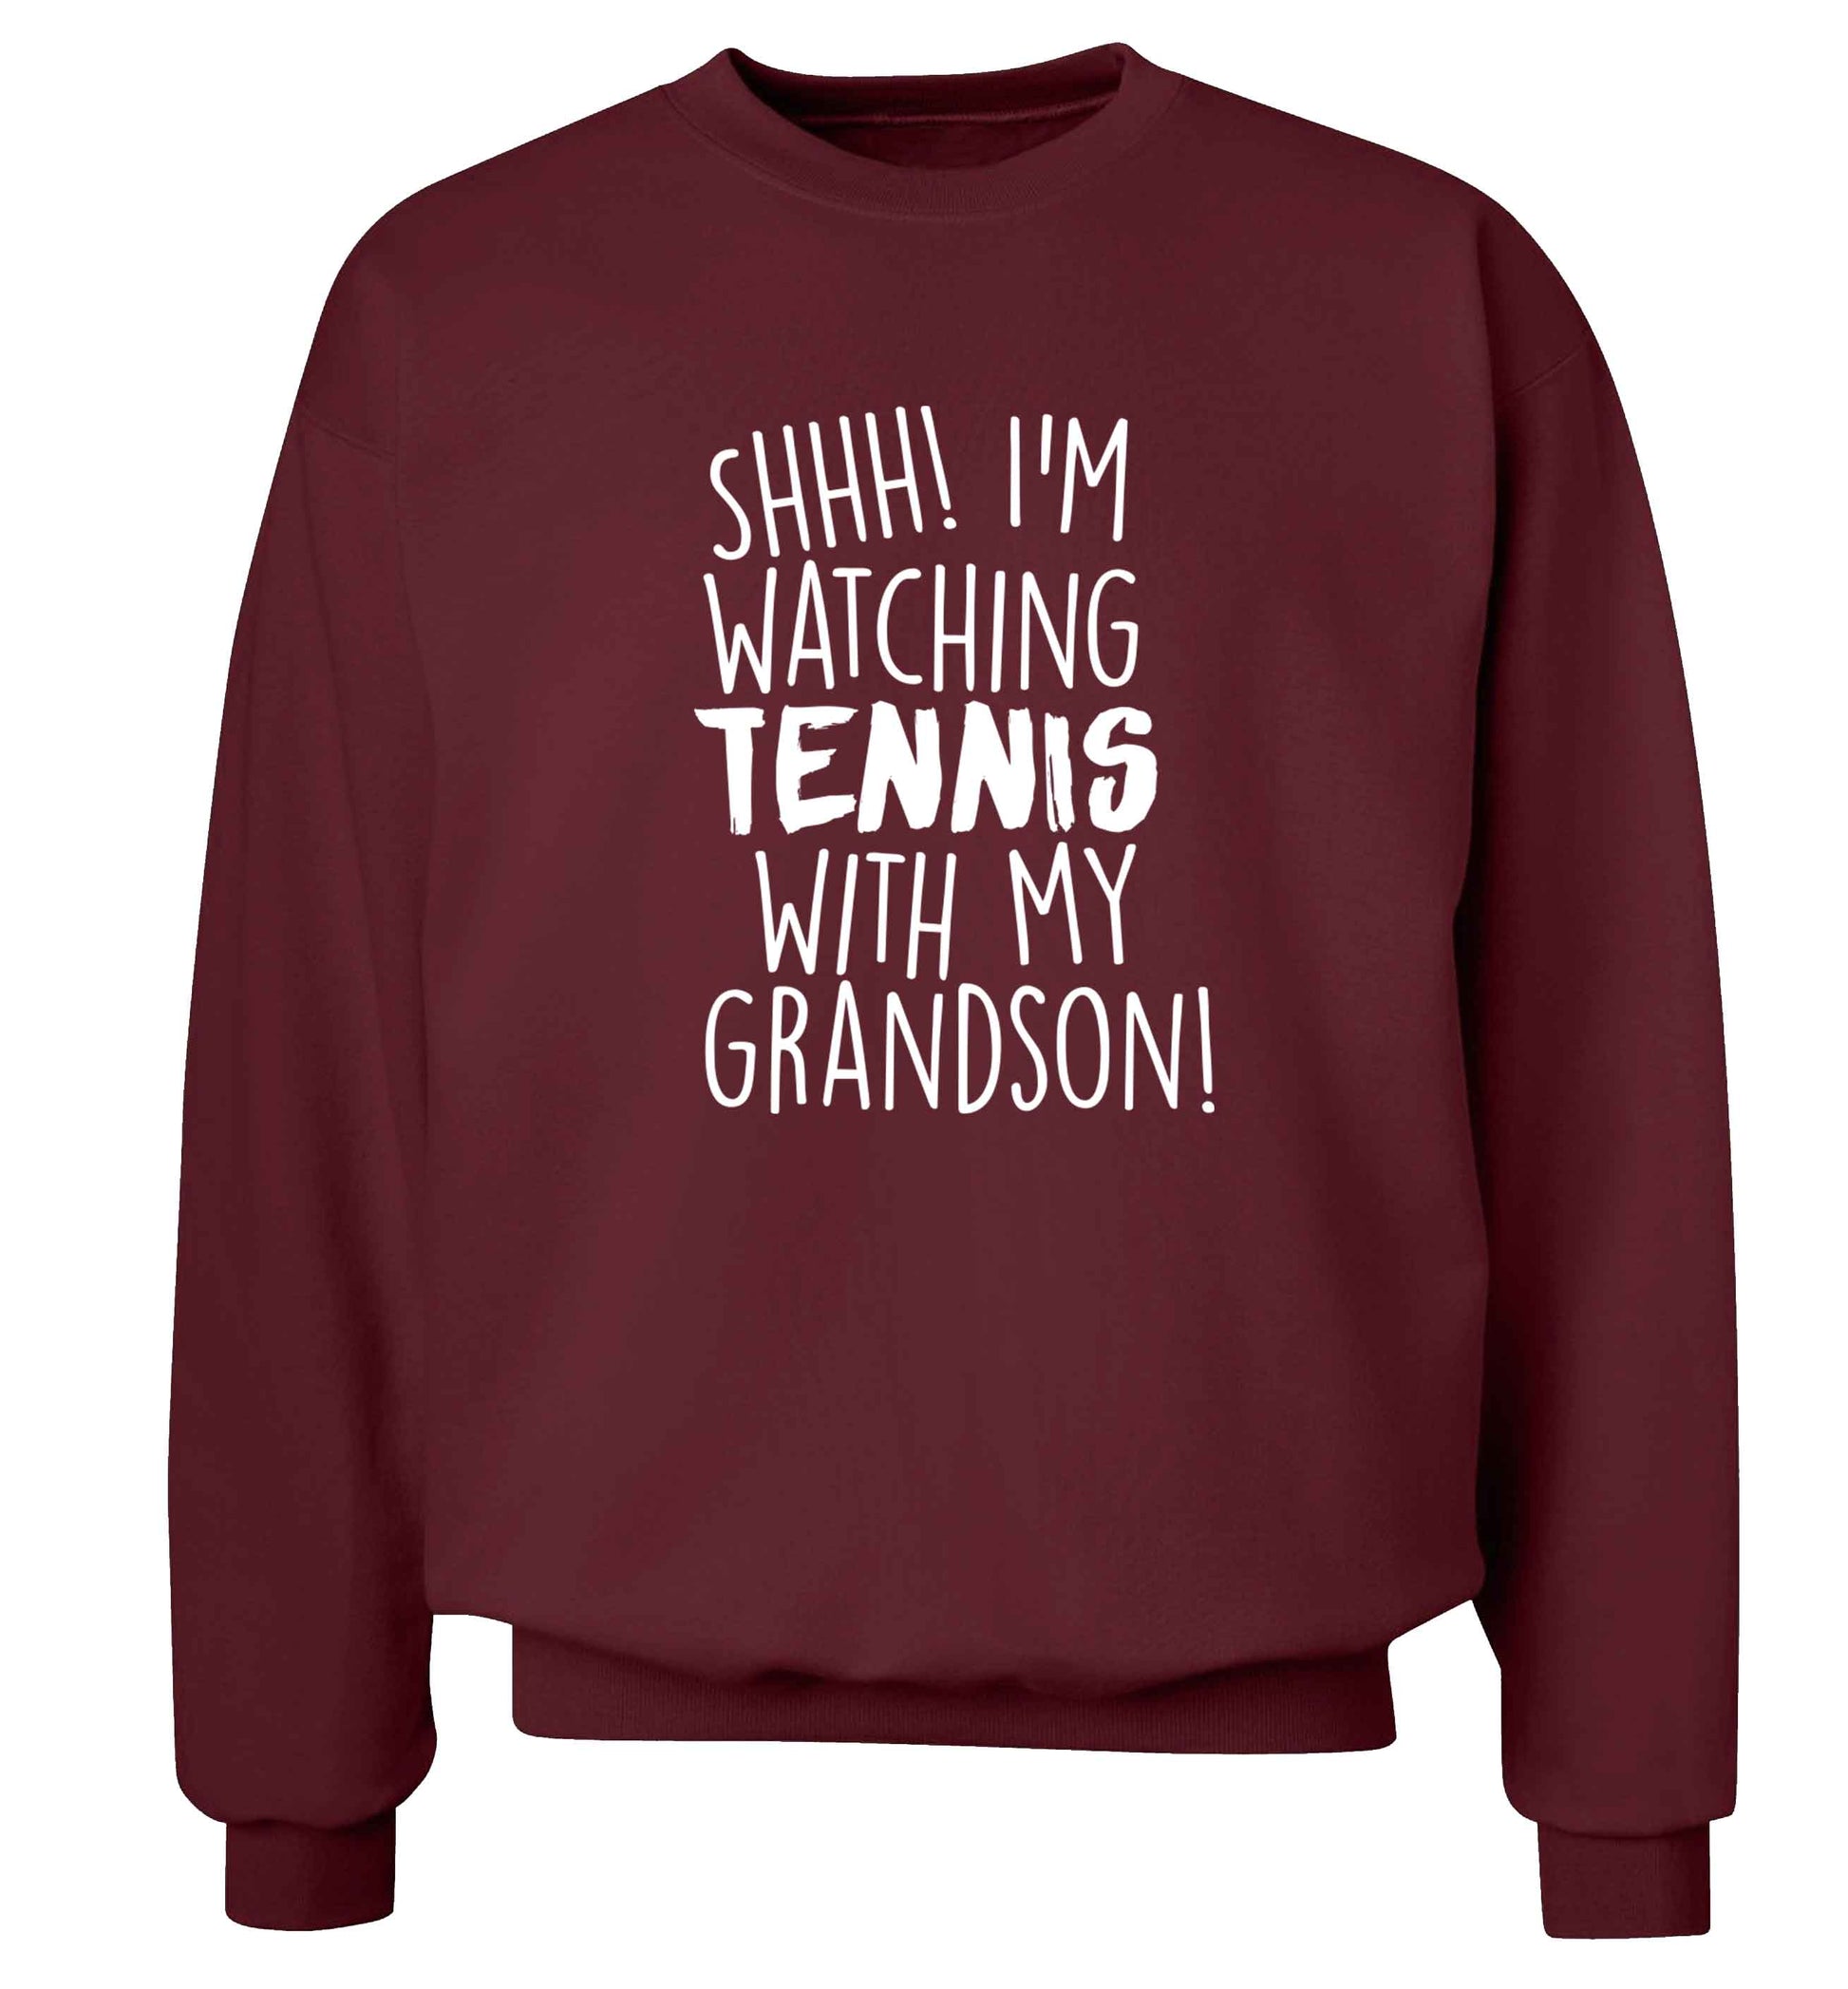 Shh! I'm watching tennis with my grandson! Adult's unisex maroon Sweater 2XL